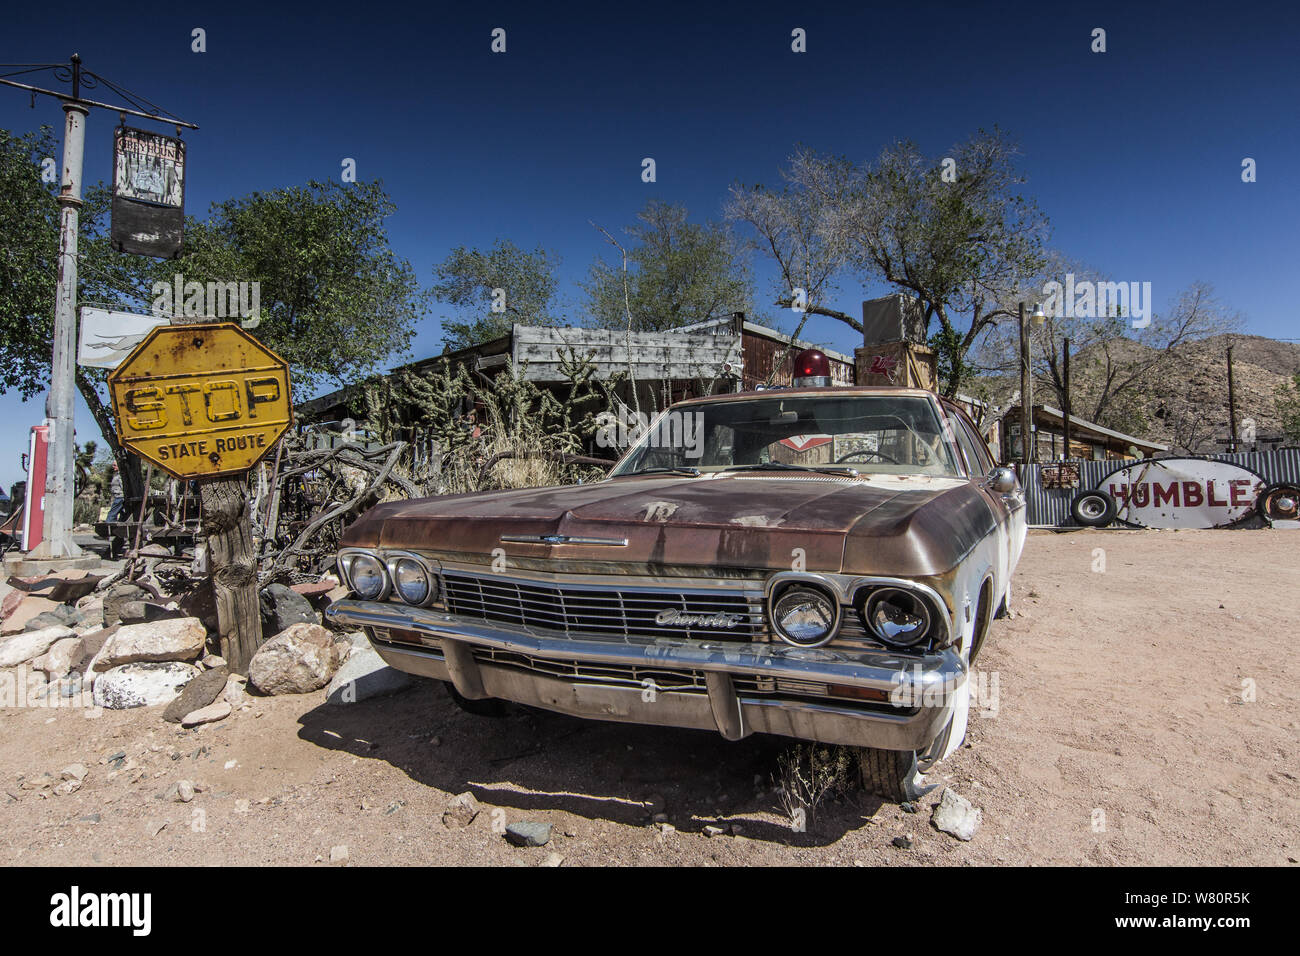 Old and wrecked car at Hackberry General Store near Route 66 Stock Photo